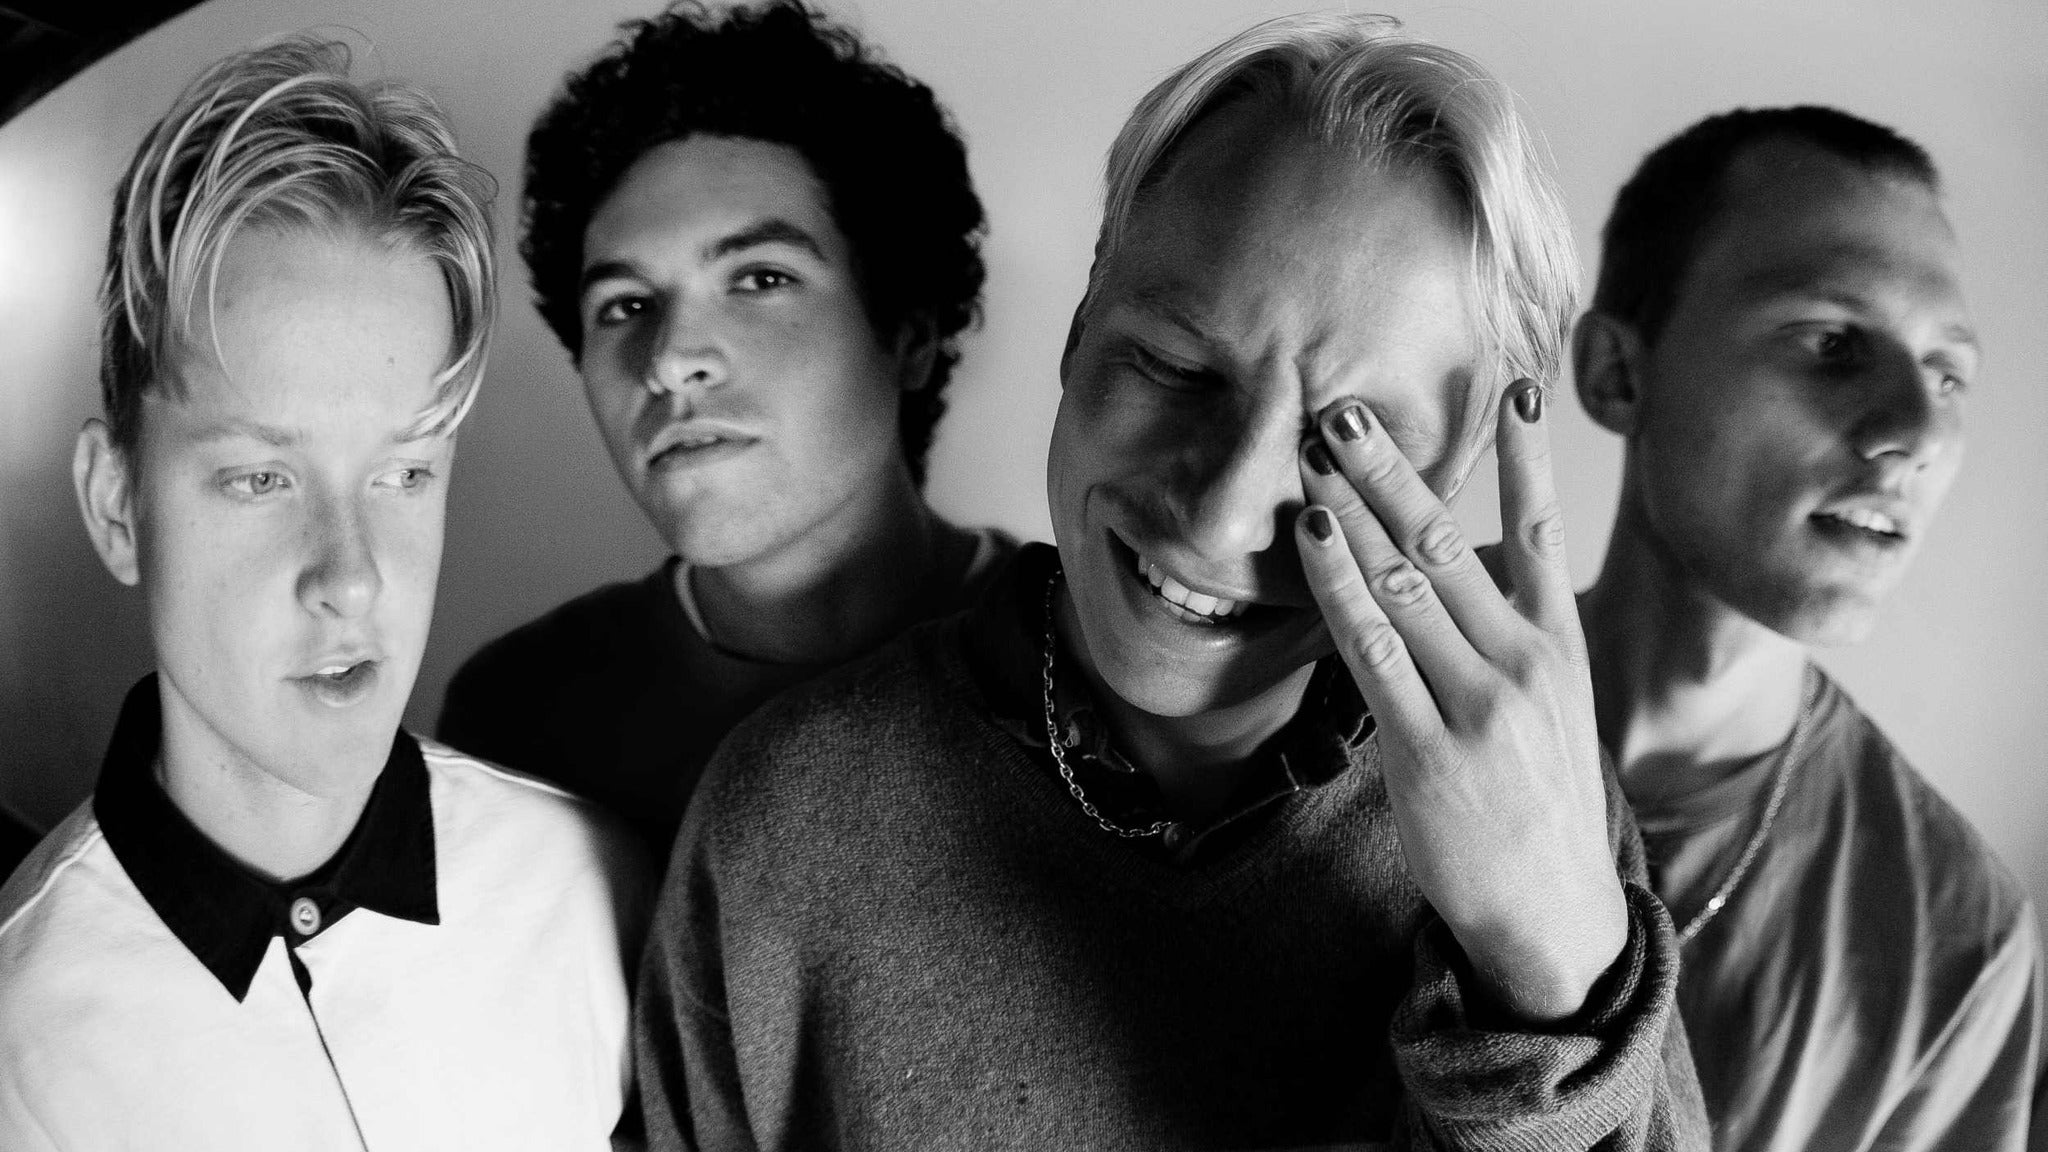 SWMRS Presents: UNCOOL Fest 5 in Hollywood promo photo for Live Nation presale offer code